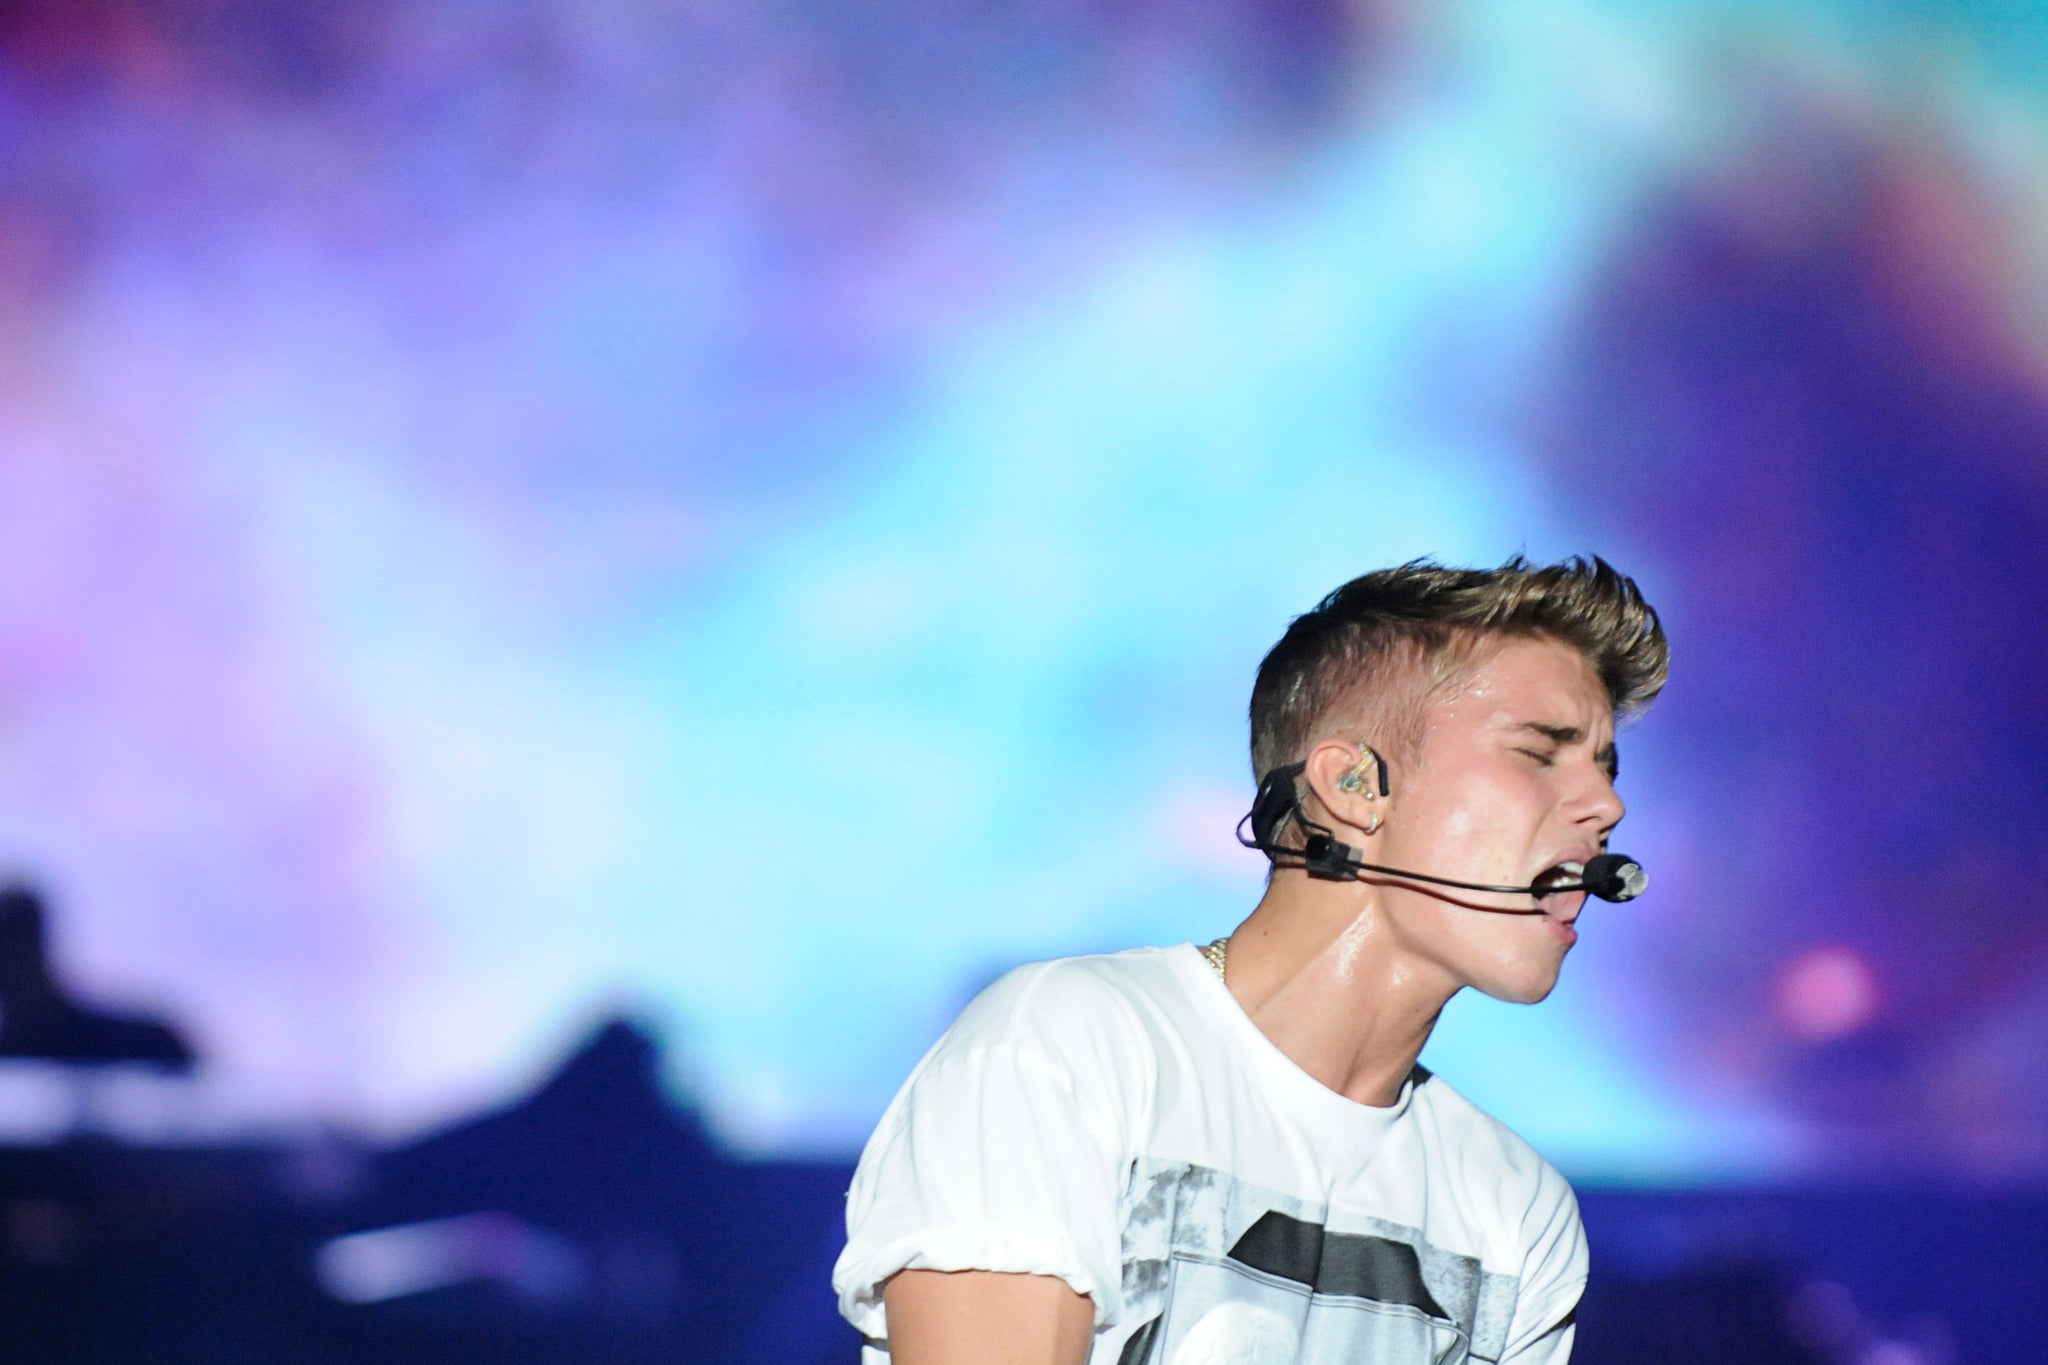 Canadian pop singer Justin Bieber performs during his "Believe" concert at the Olimpic Stadium in Santo Domingo October 22, 2013